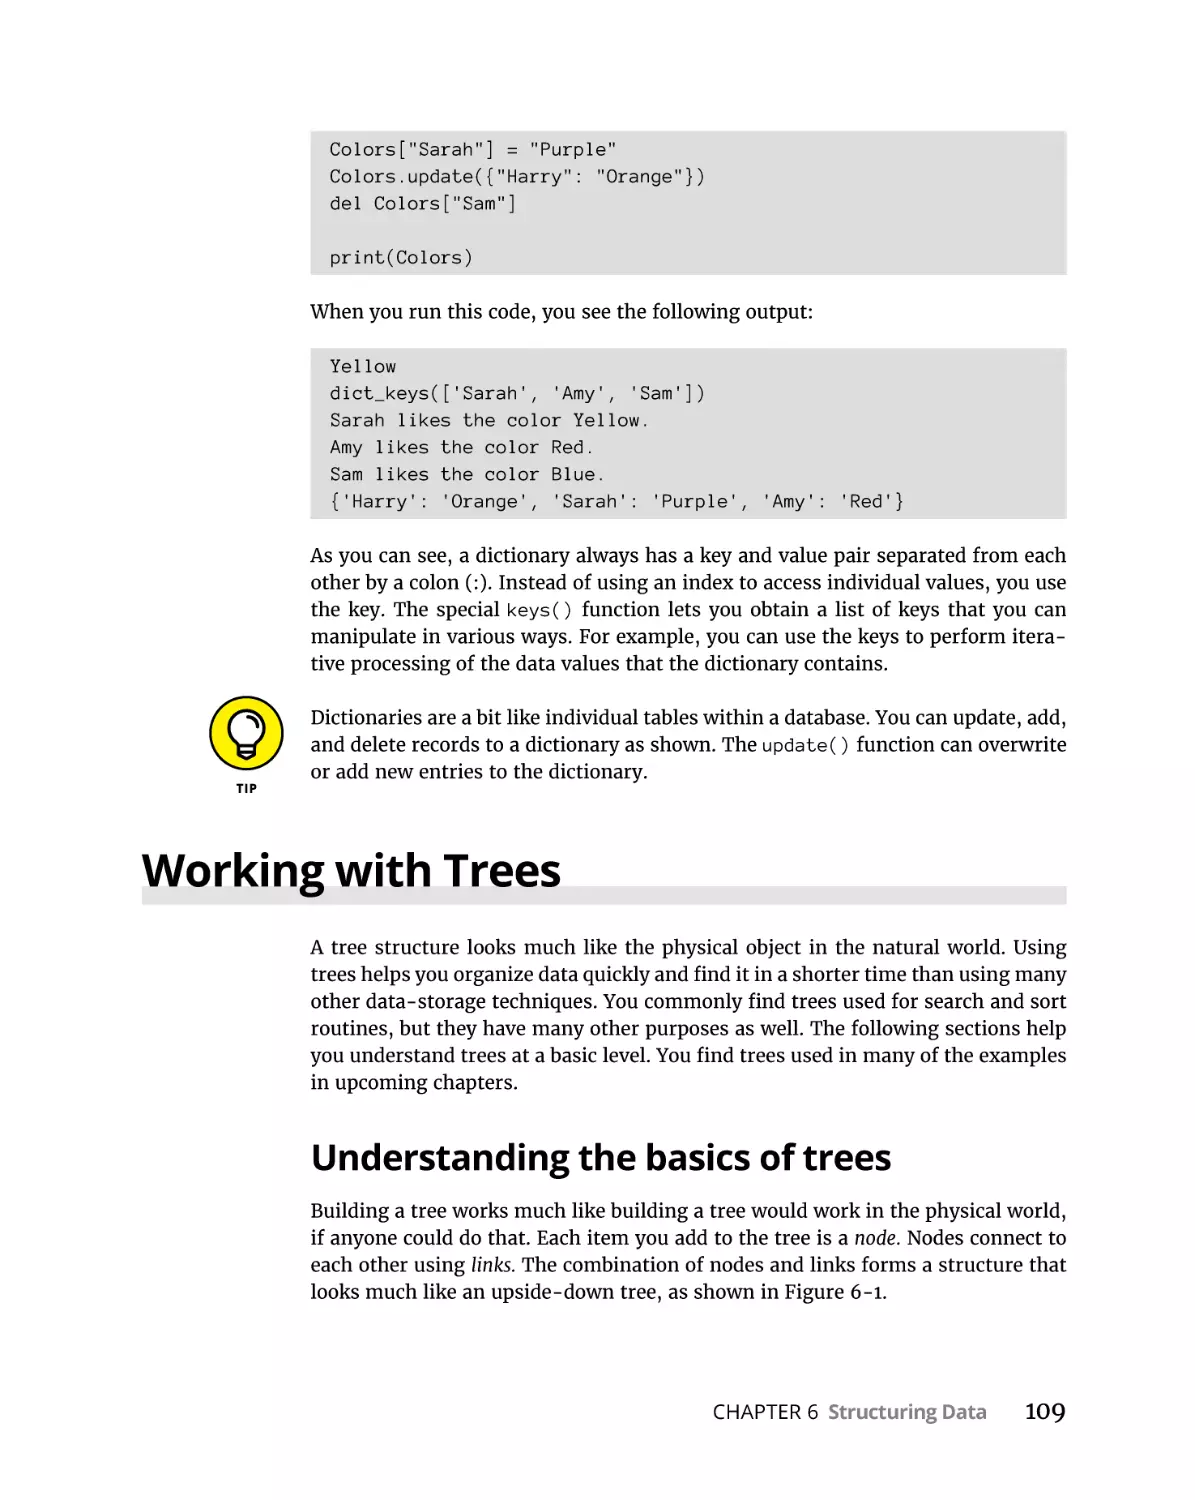 Working with Trees
Understanding the basics of trees